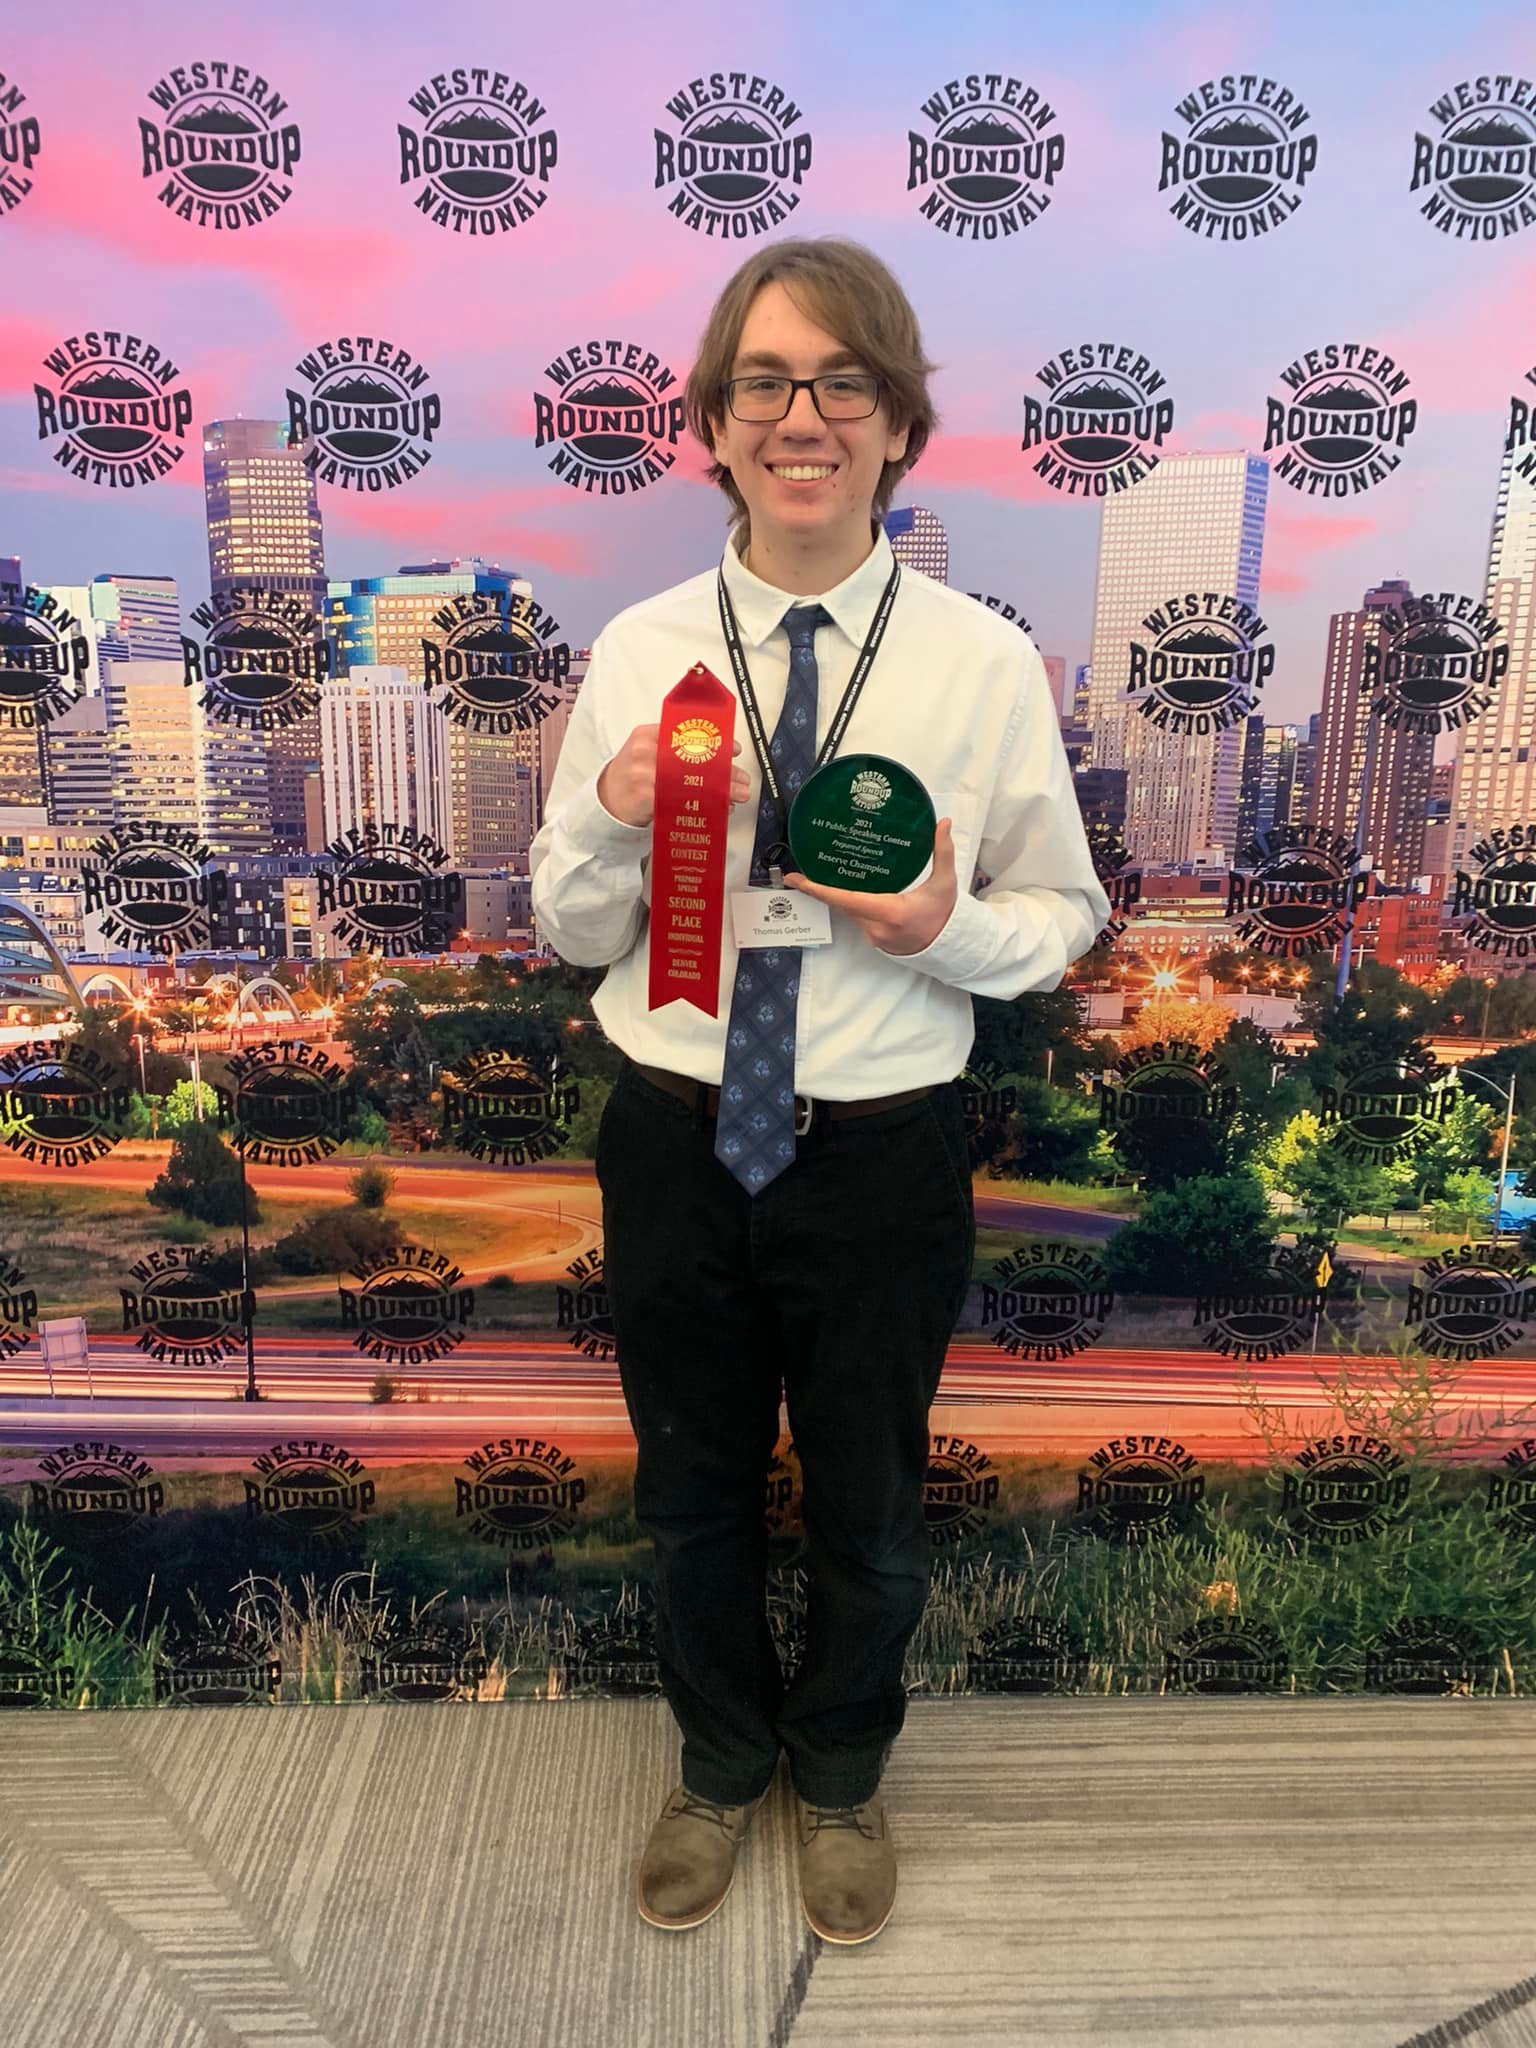 Thomas Gerber of Ransom County, North Dakota, is reserve champion in prepared public speaking at the Western National Roundup in Denver.